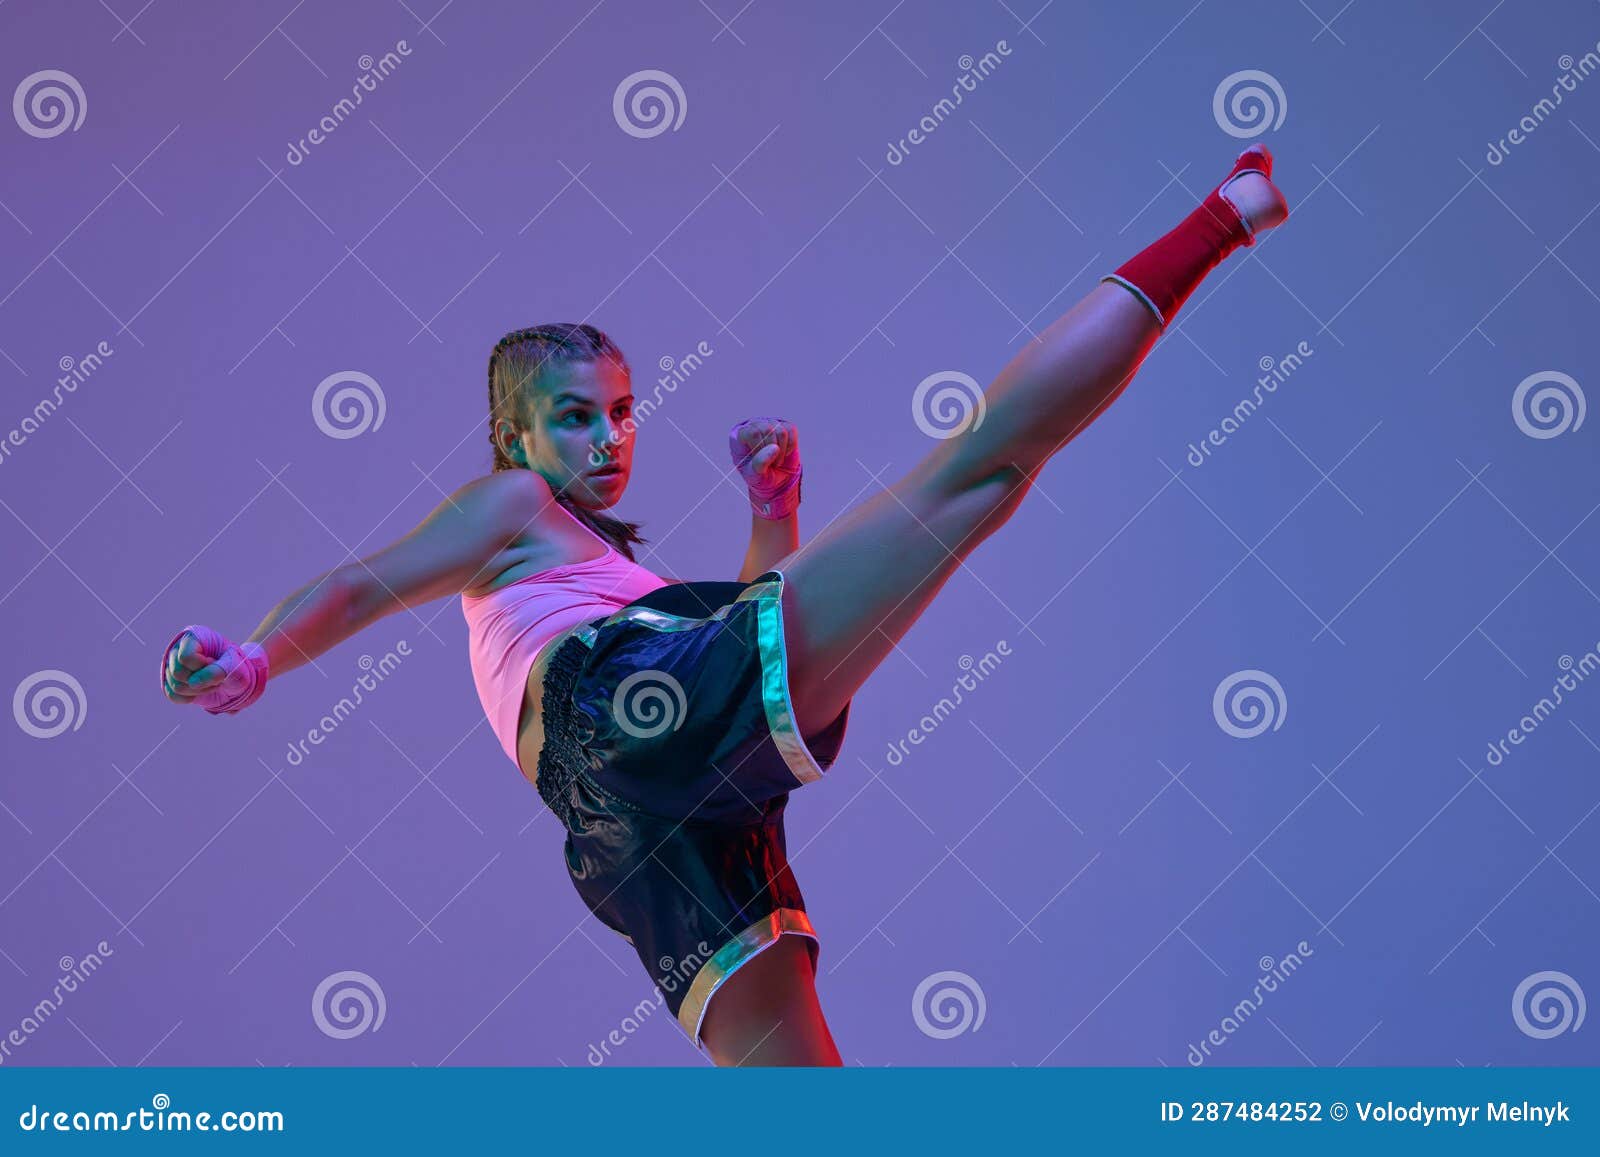 Strong Legs. MMA Fighter, Teen Girl Training, Kicking with Leg Against ...